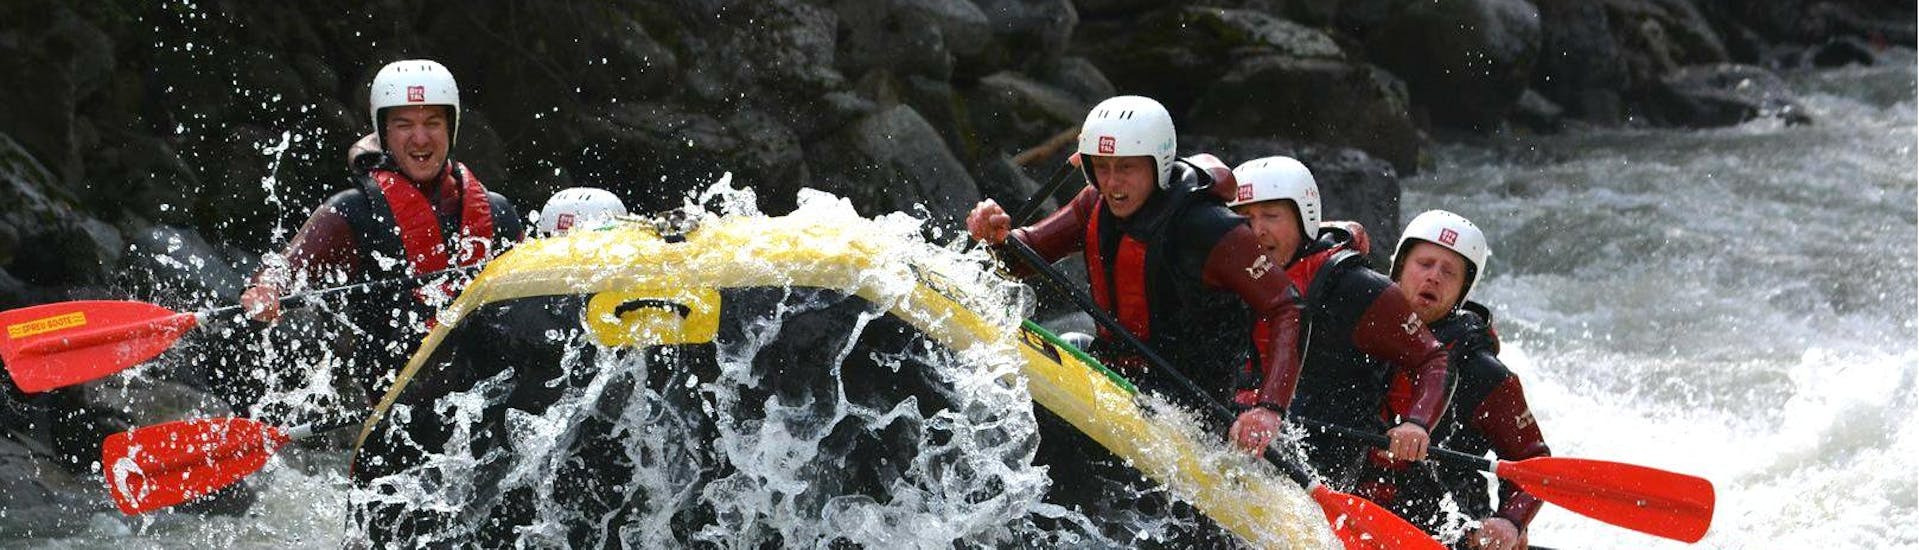 During Extreme Rafting on the Ötztaler Ache from Haiming with CanKick Ötztal, a group of young men is facing a grade V rapid on Ötztaler Ache.